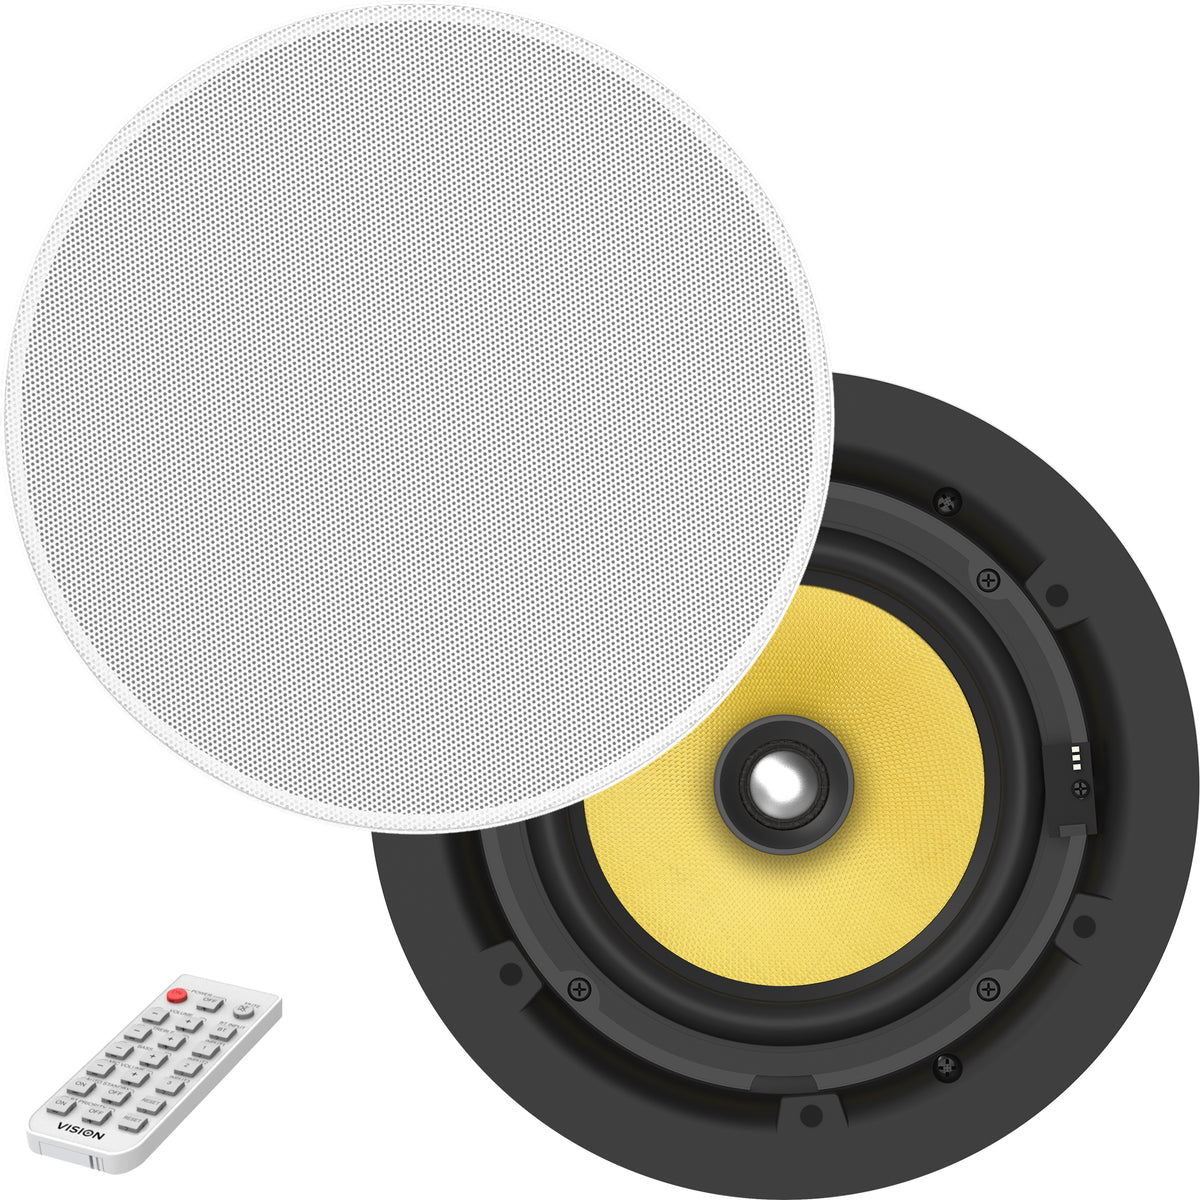 VISION Professional Pair Active 6.5" Ceiling Speakers - LIFETIME WARRANTY - 2 x 35w (RMS) - switch between modes: standalone pair, or multi-pair system - RS-232 - Bluetooth (renameable, set pin), minijack input - daisy-chain in/out - Remote control -